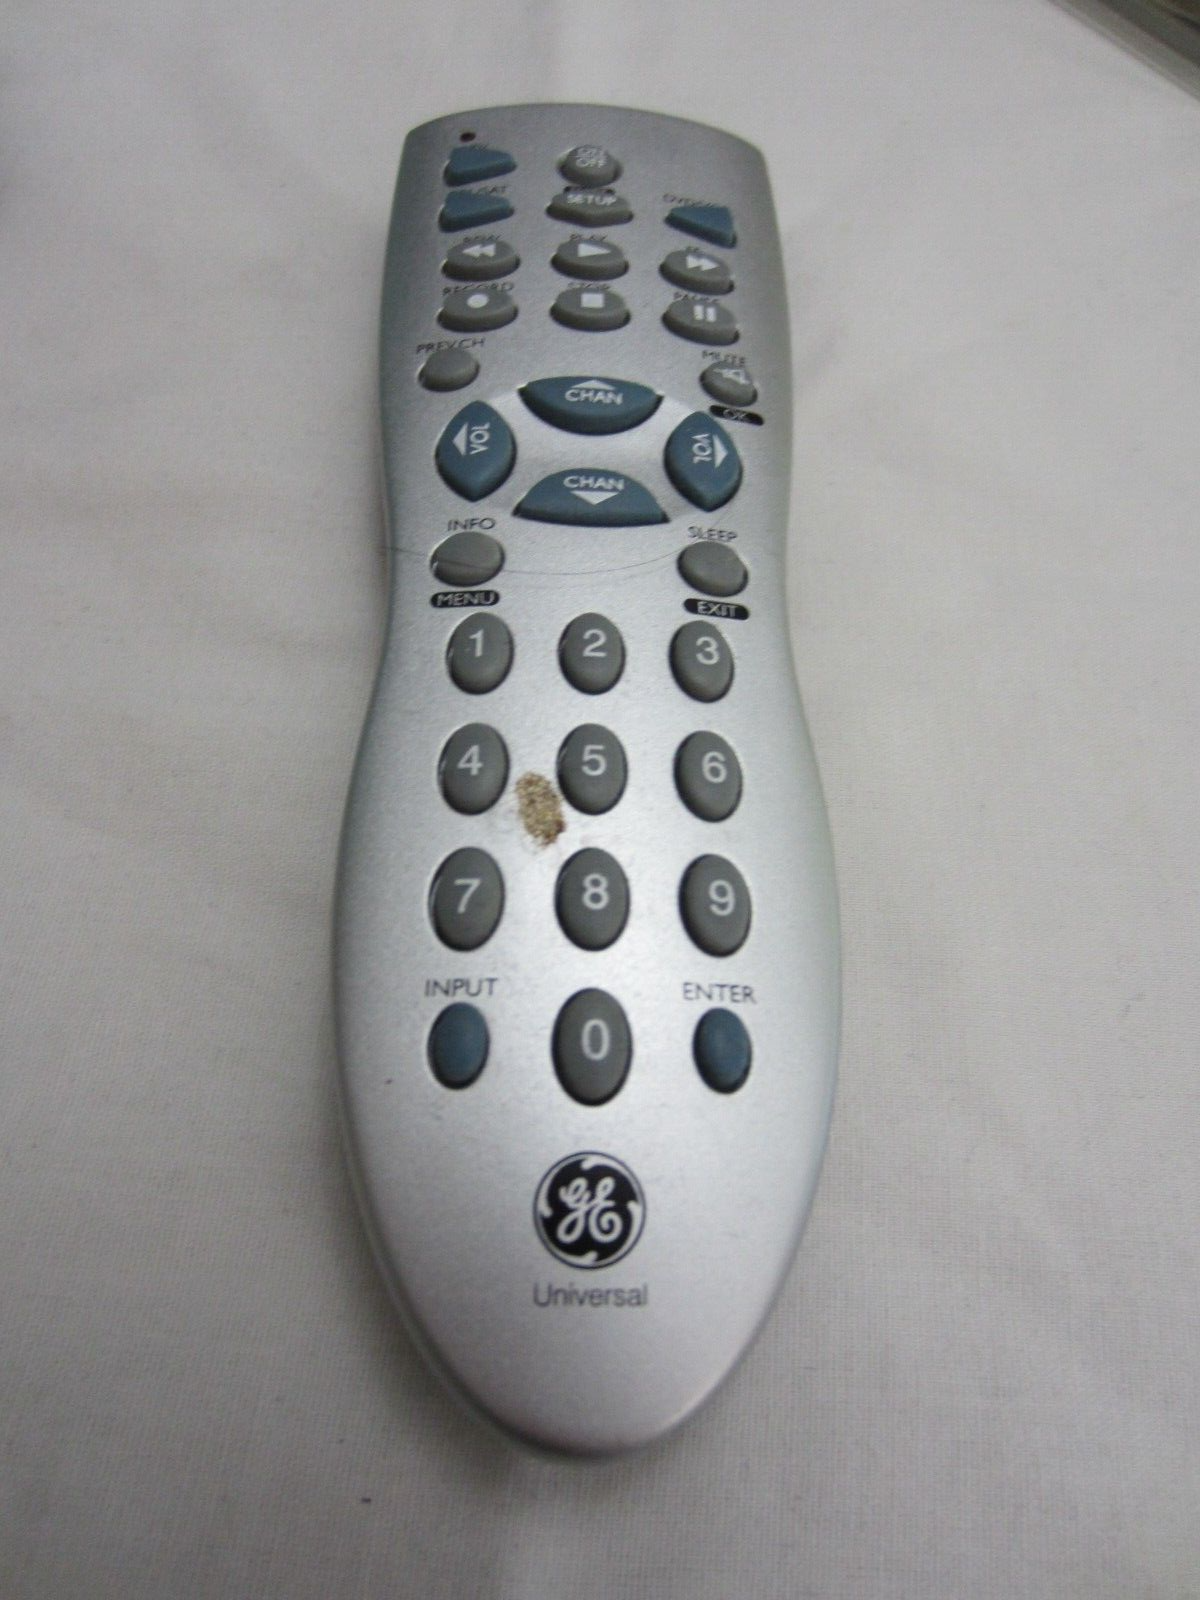 Primary image for GE RC24912-E Universal Remote Control for 3 Devices